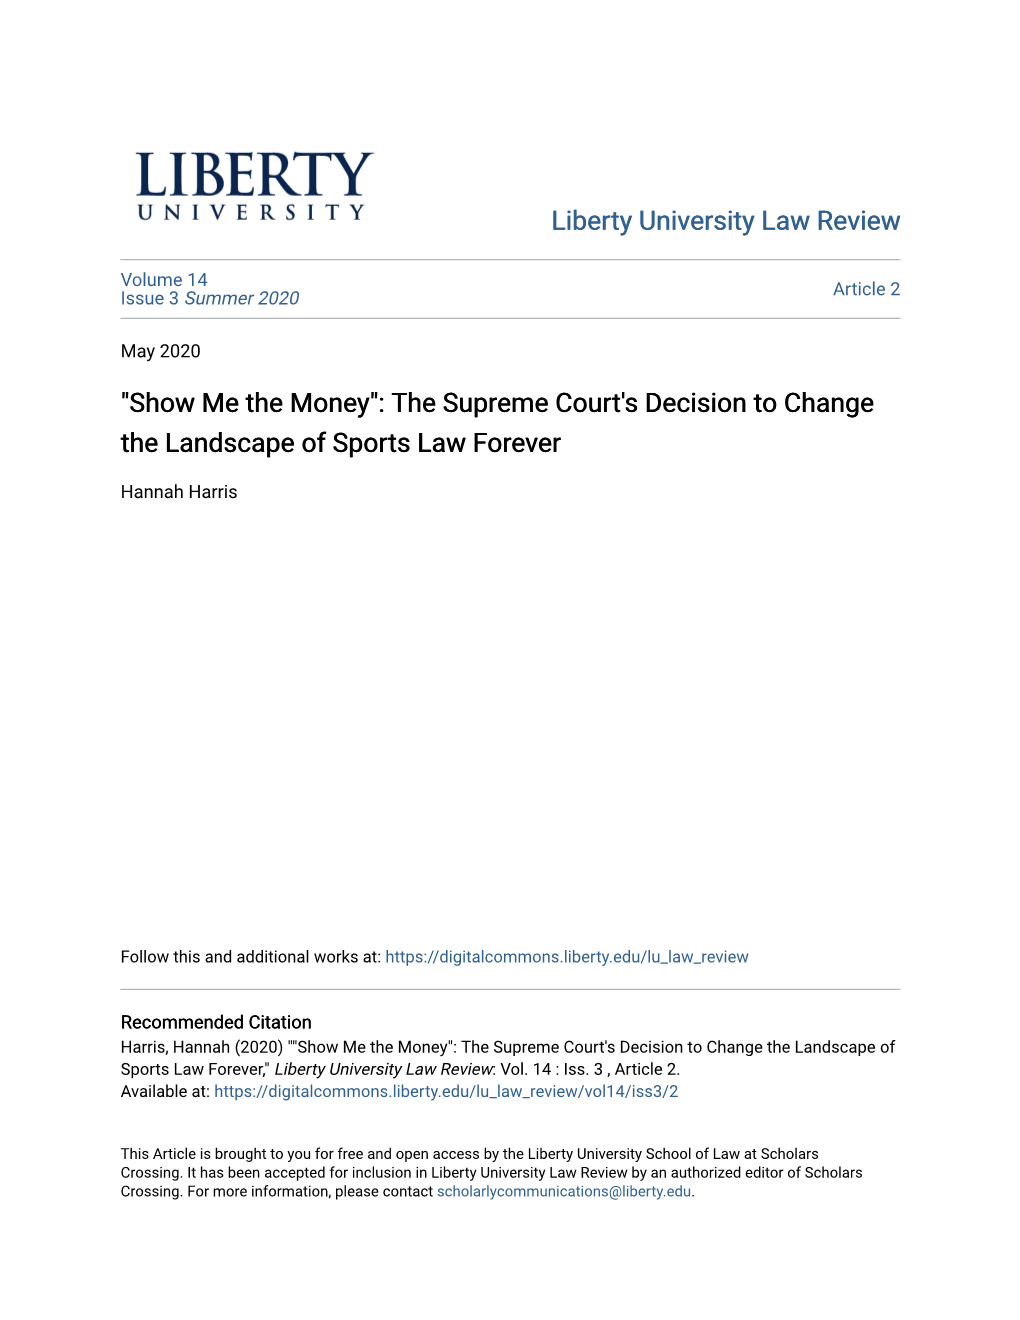 "Show Me the Money": the Supreme Court's Decision to Change the Landscape of Sports Law Forever